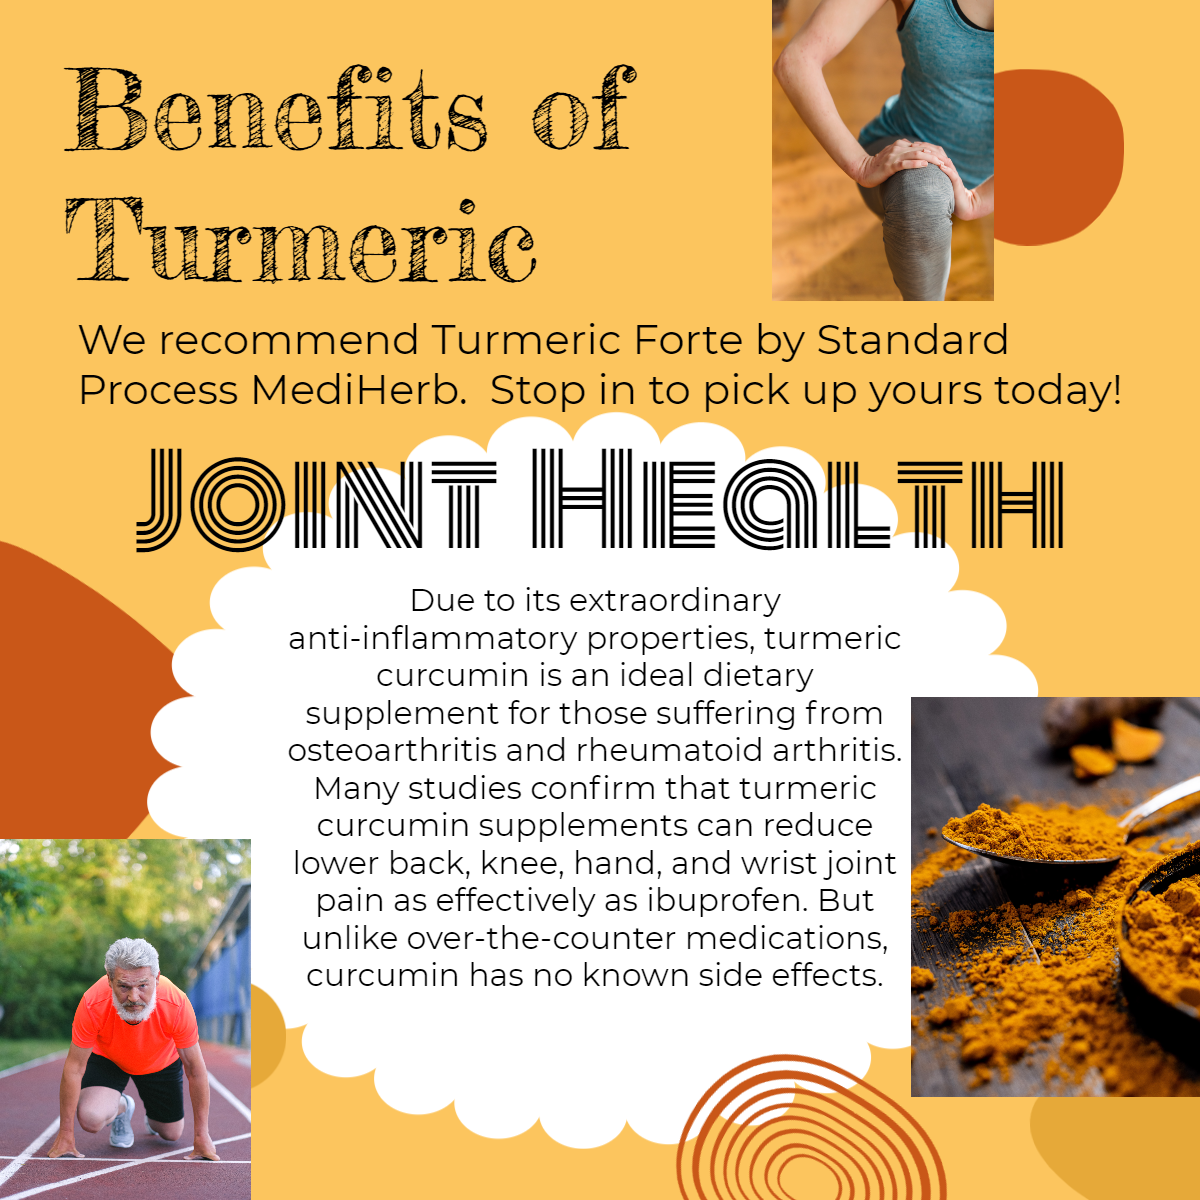 Turmeric for joint health